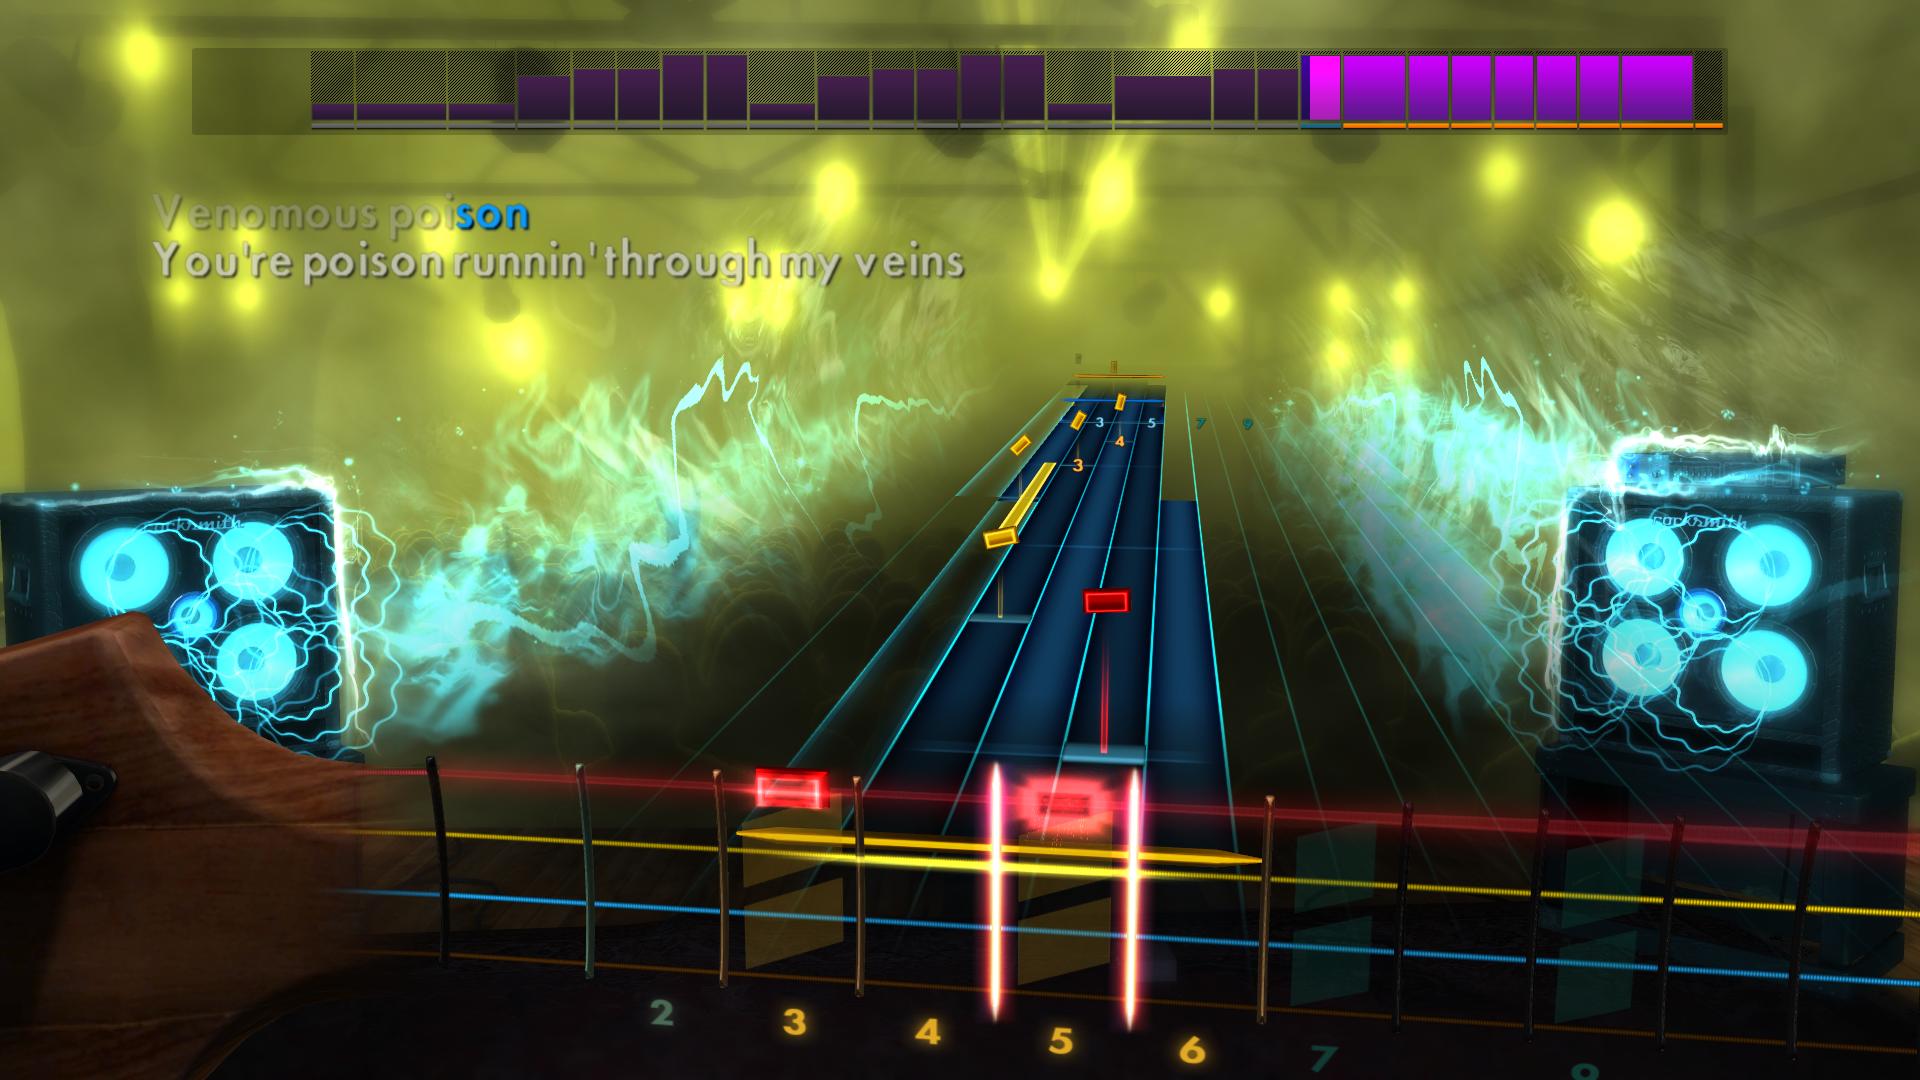 Rocksmith 2014 Edition – Remastered – Alice Cooper Song Pack screenshot